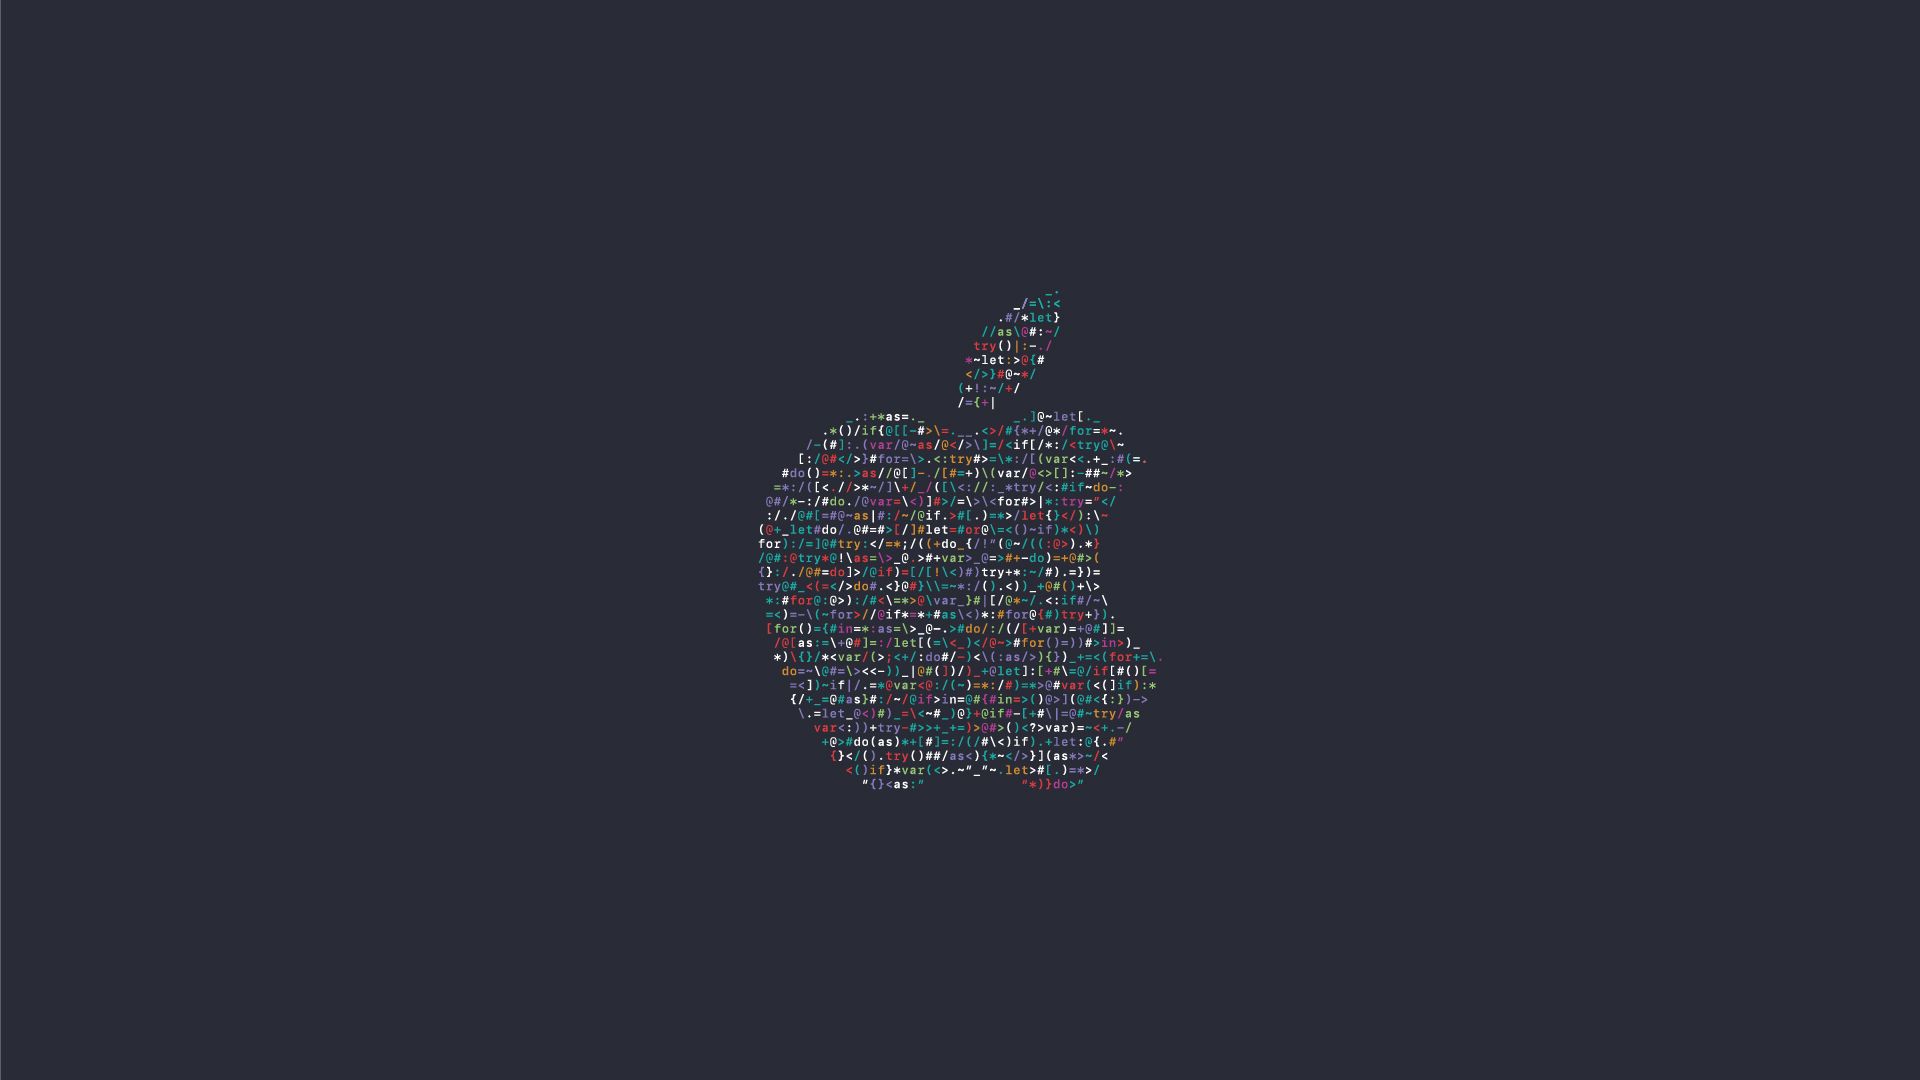 Anyone Else Love The ASCII Style Apple Logo From WWDC? Here's A 5K Wallpaper Of It